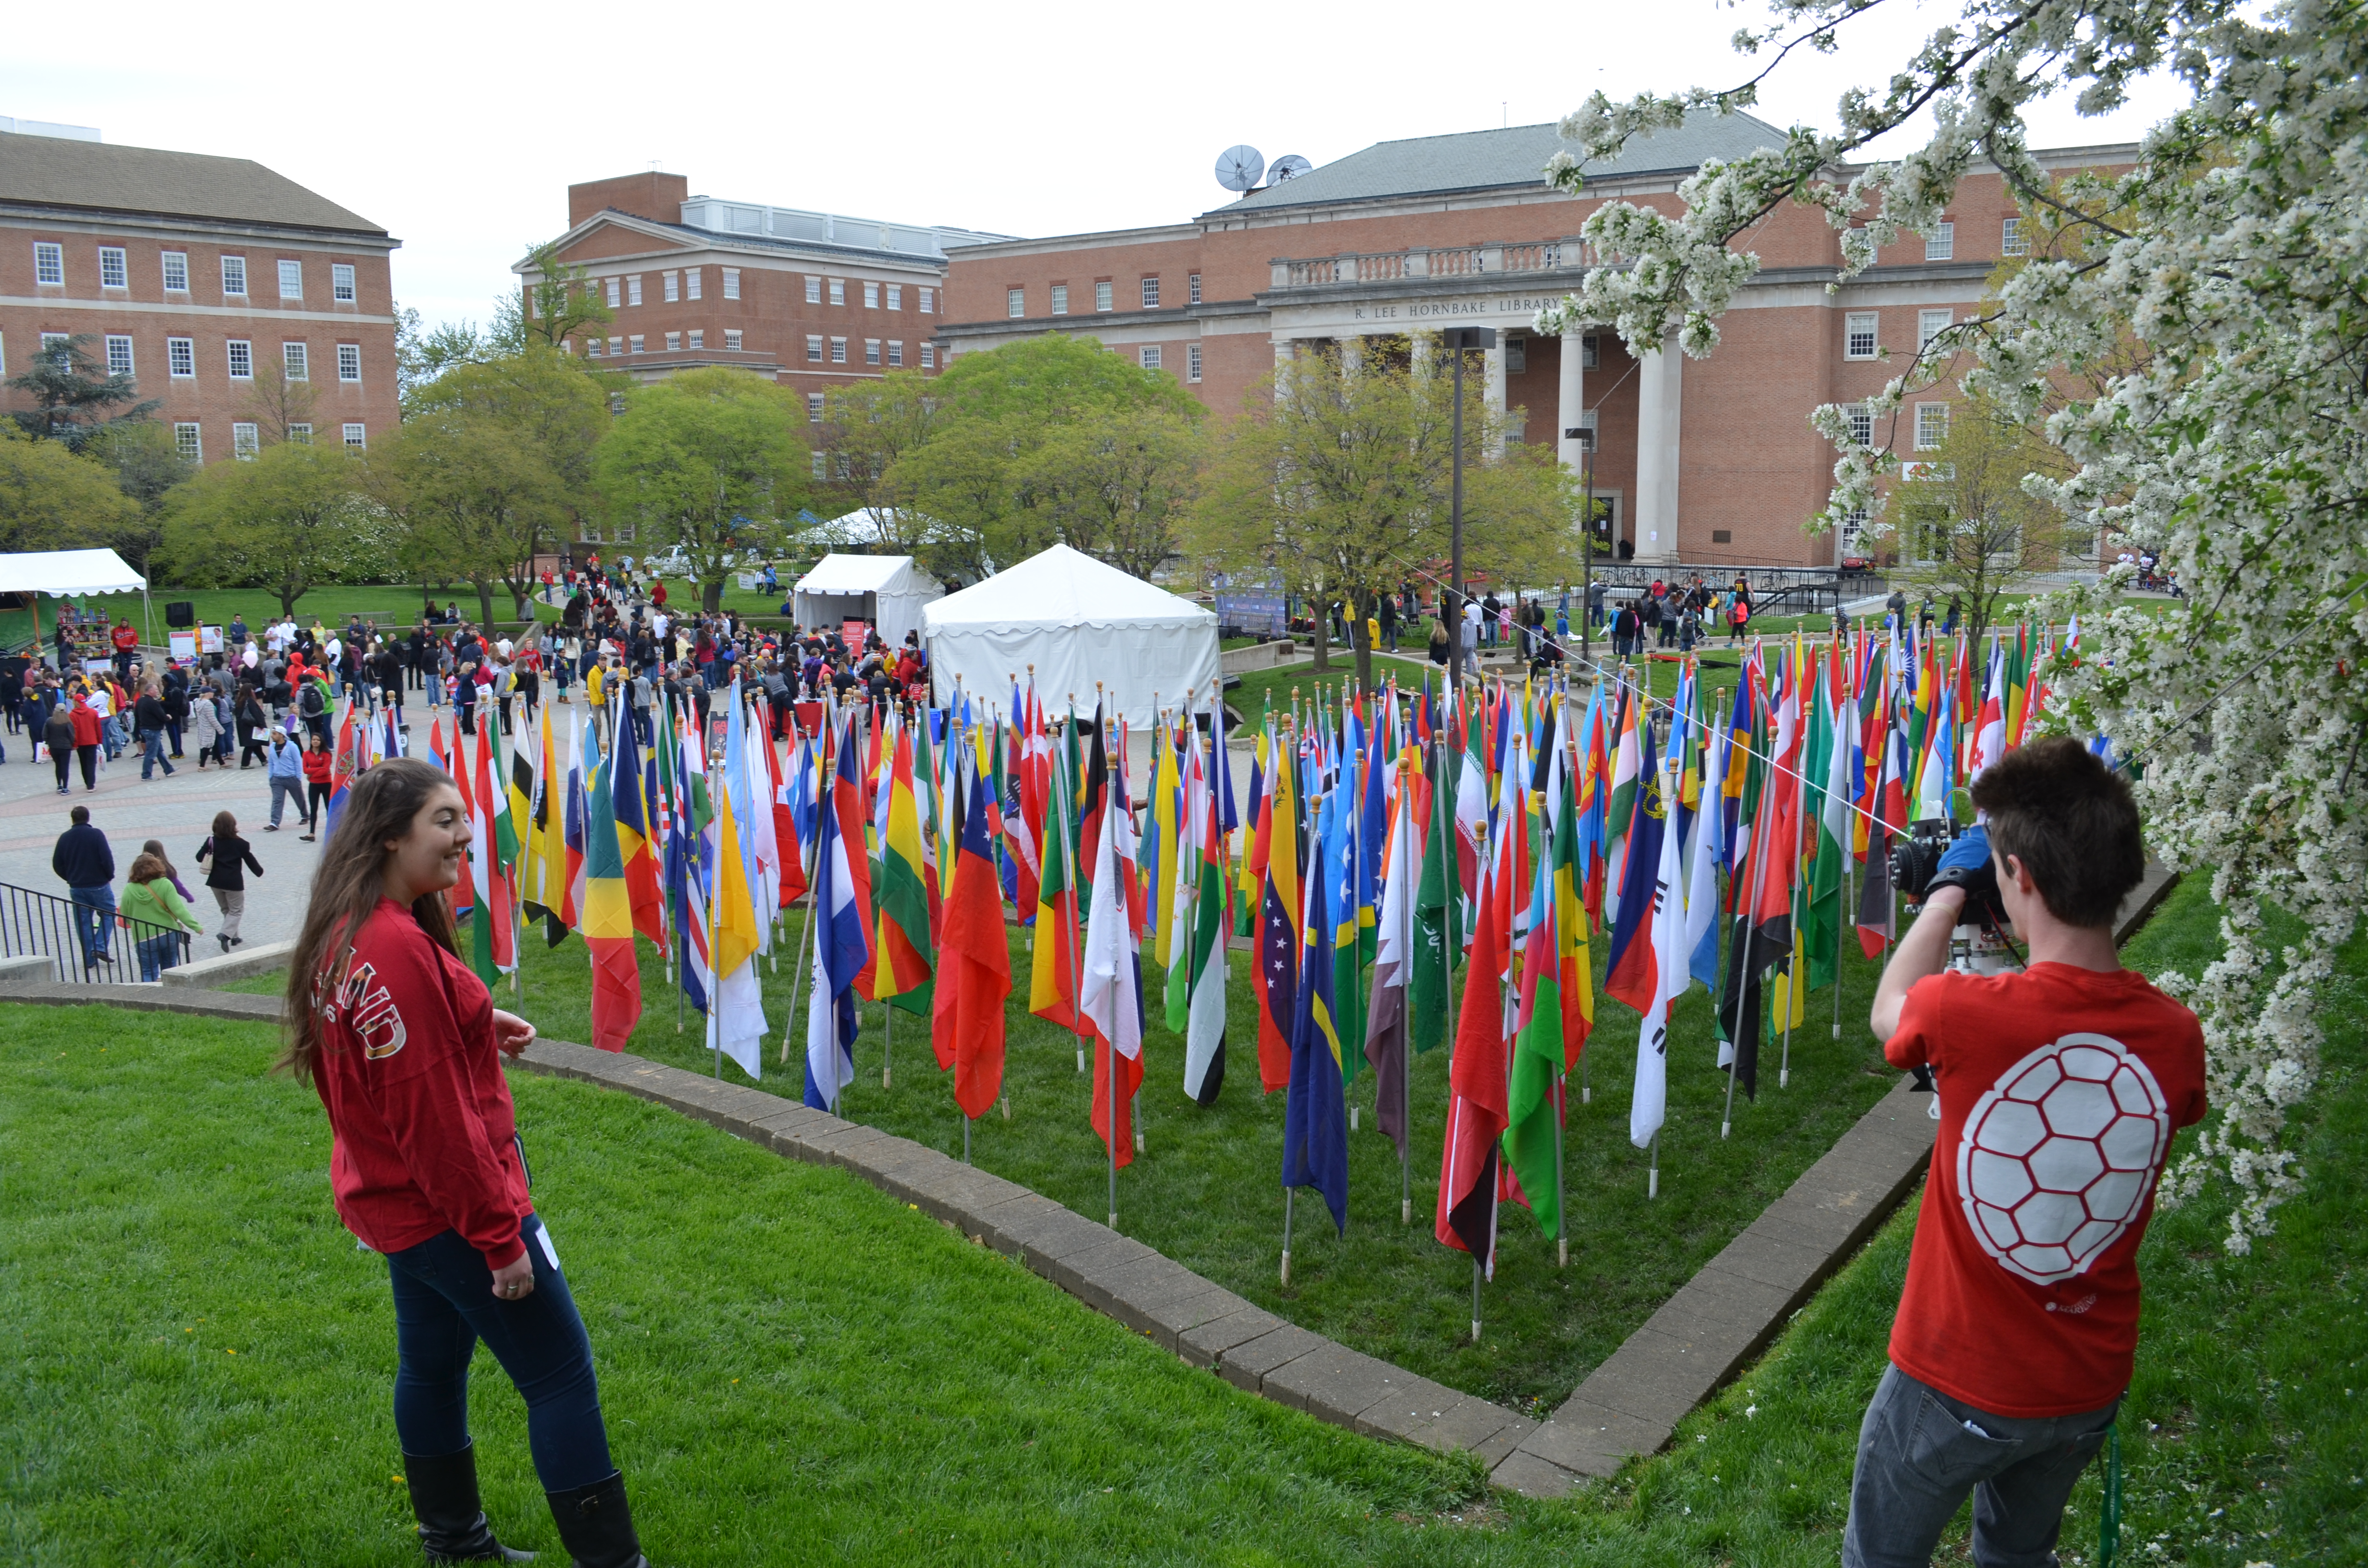 [Review] Maryland Day 2015 Brings Together University and Community